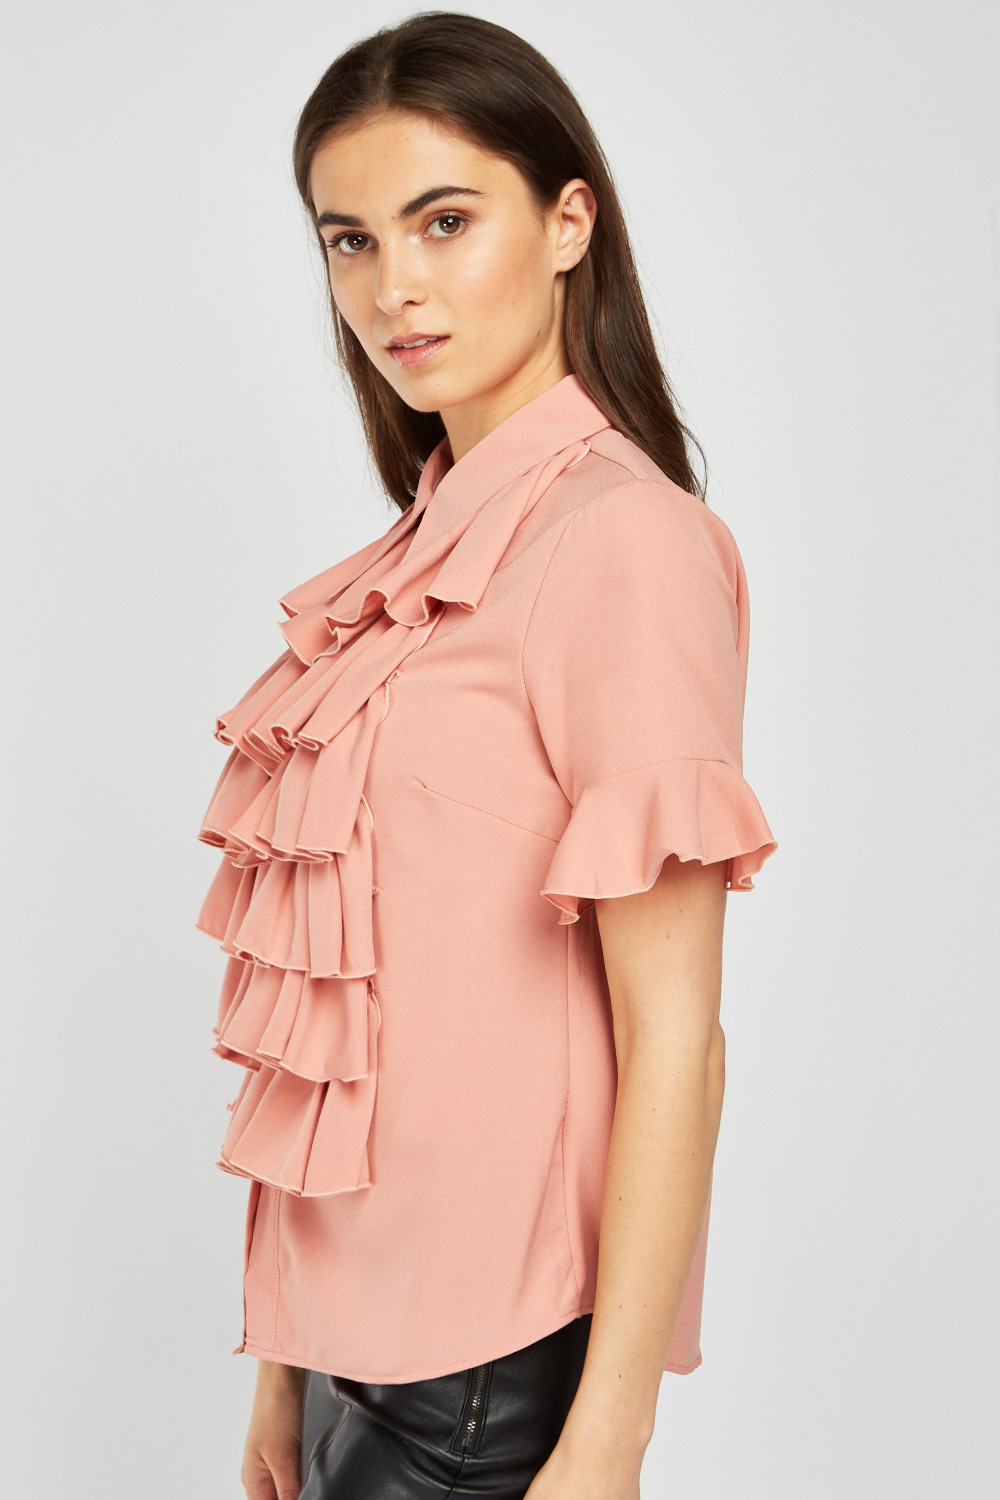 Layered Ruffle Front Blouse - Just $7